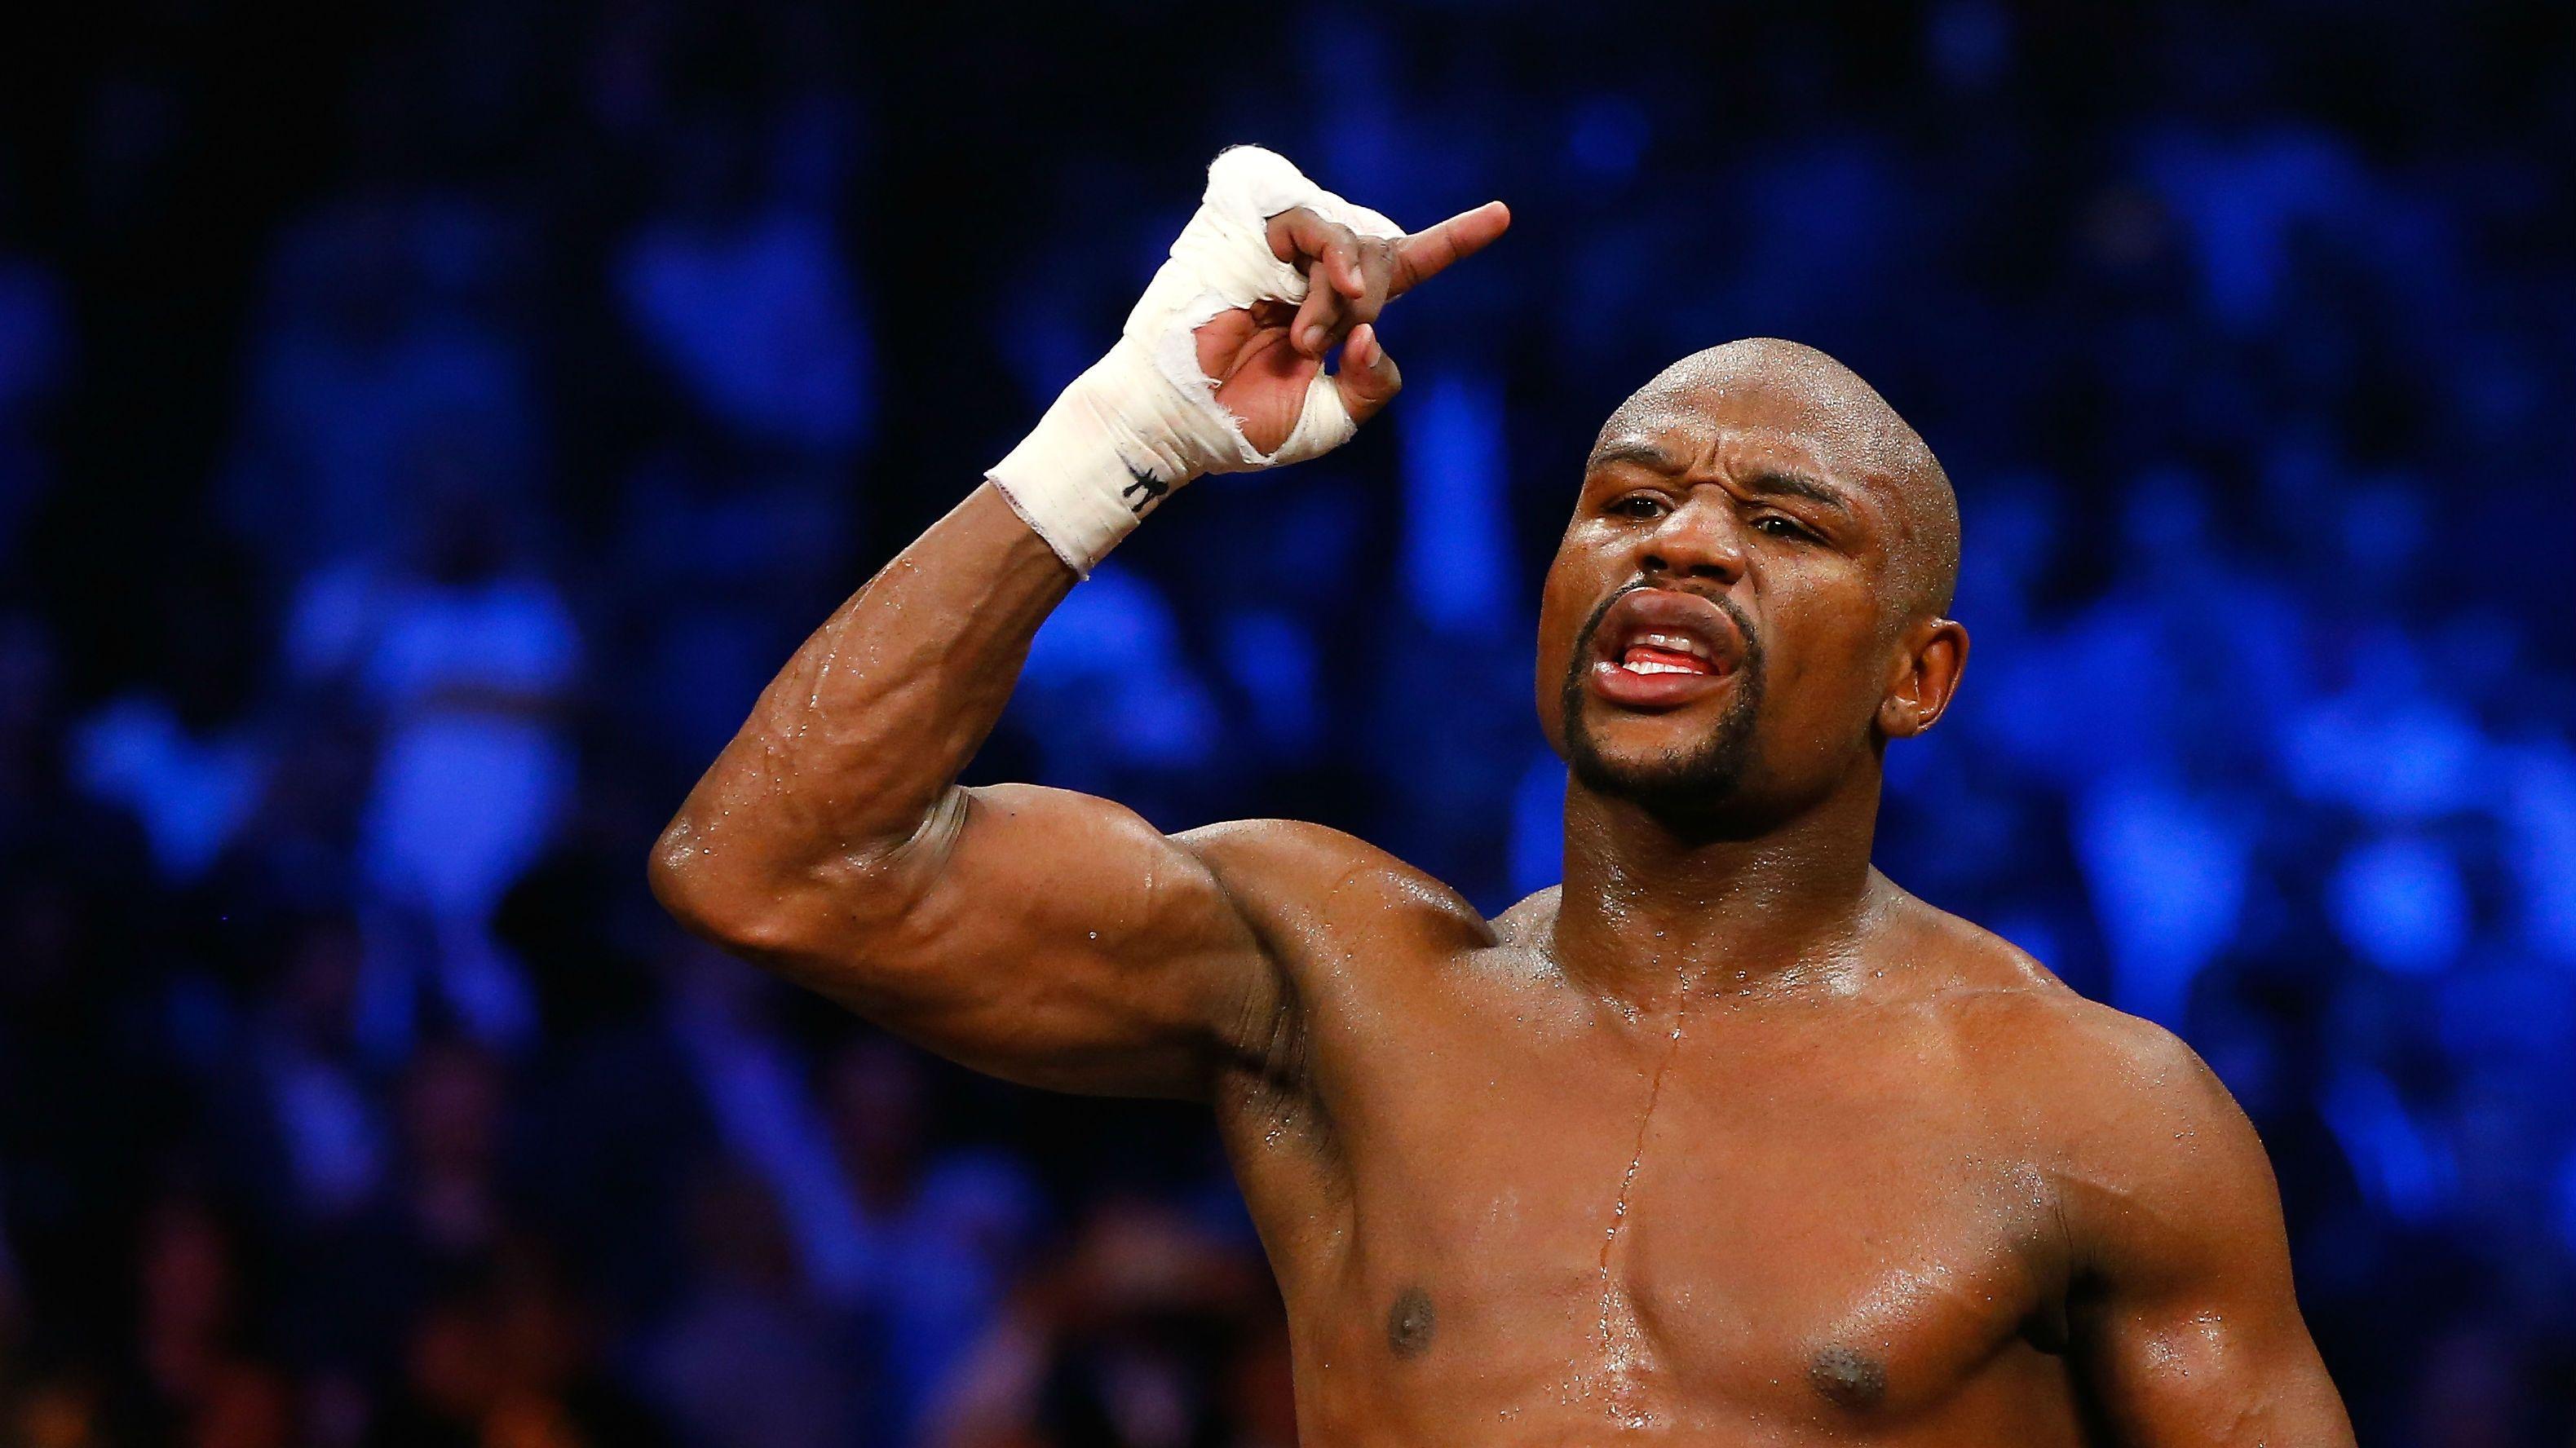 Floyd Mayweather Jr. Wallpaper Image Photo Picture Background